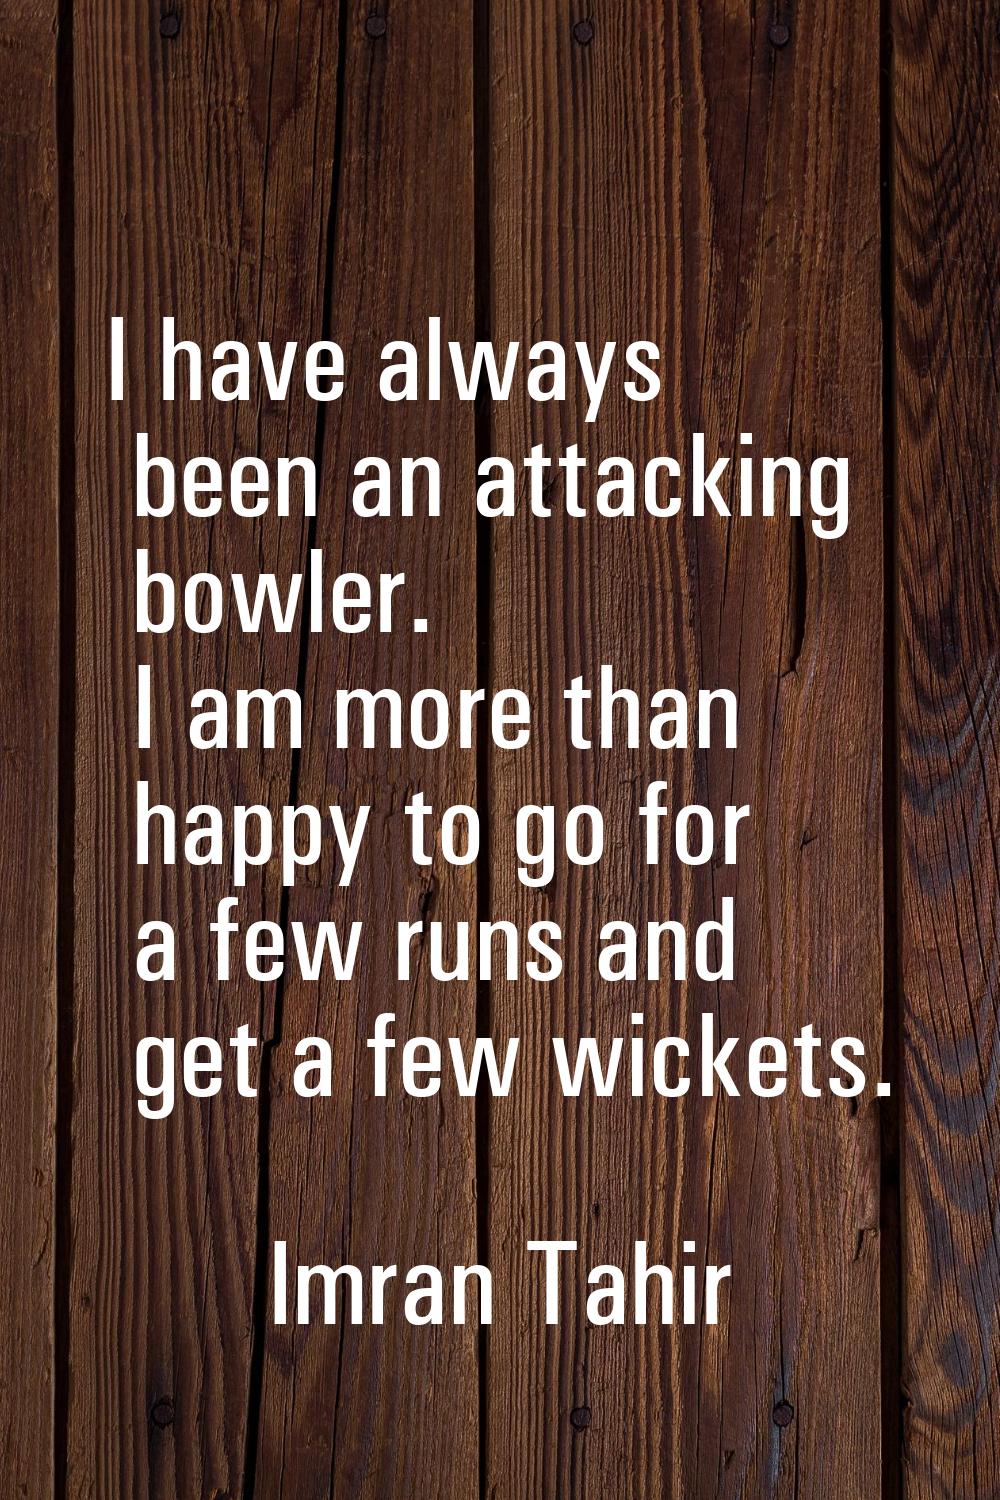 I have always been an attacking bowler. I am more than happy to go for a few runs and get a few wic